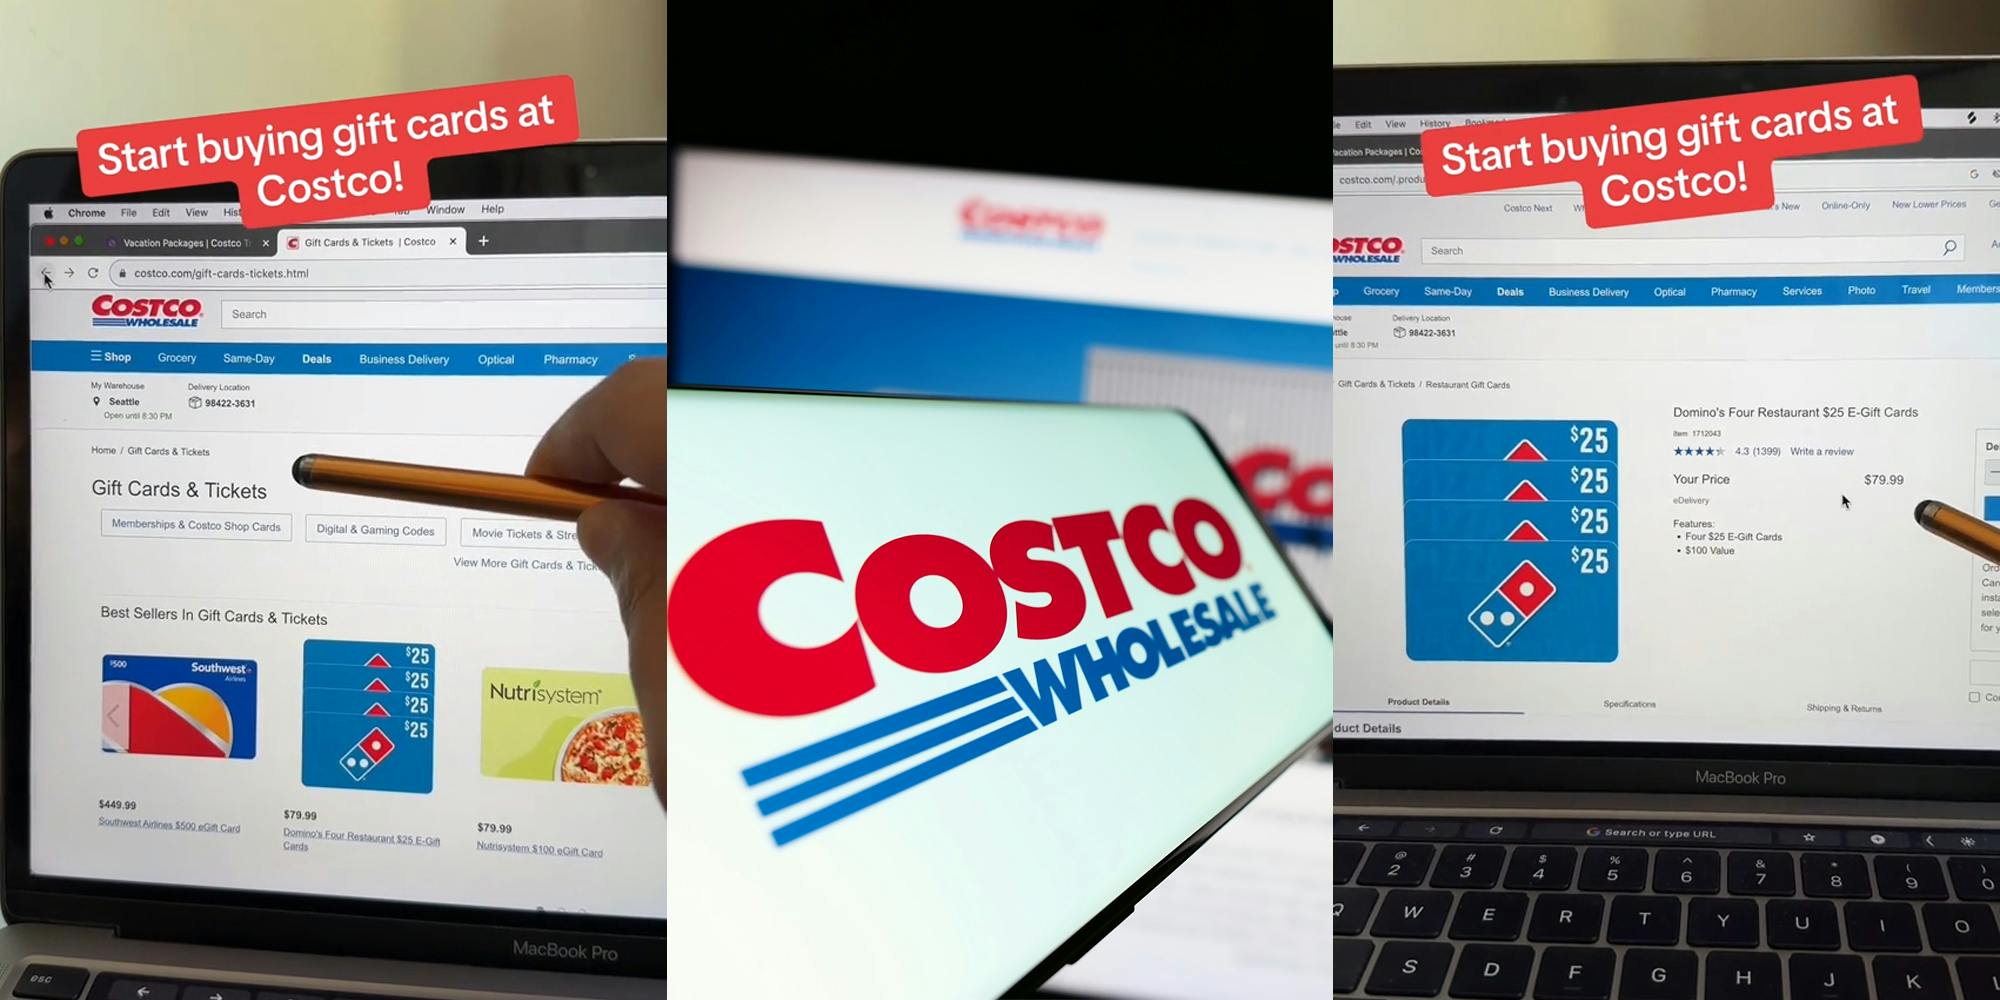 Costco website gift cards on laptop screen with caption "Start buying gift cards at Costco!" (l) Costco on phone screen in front of laptop (c) Costco website gift cards on laptop screen with caption "Start buying gift cards at Costco!" (r)